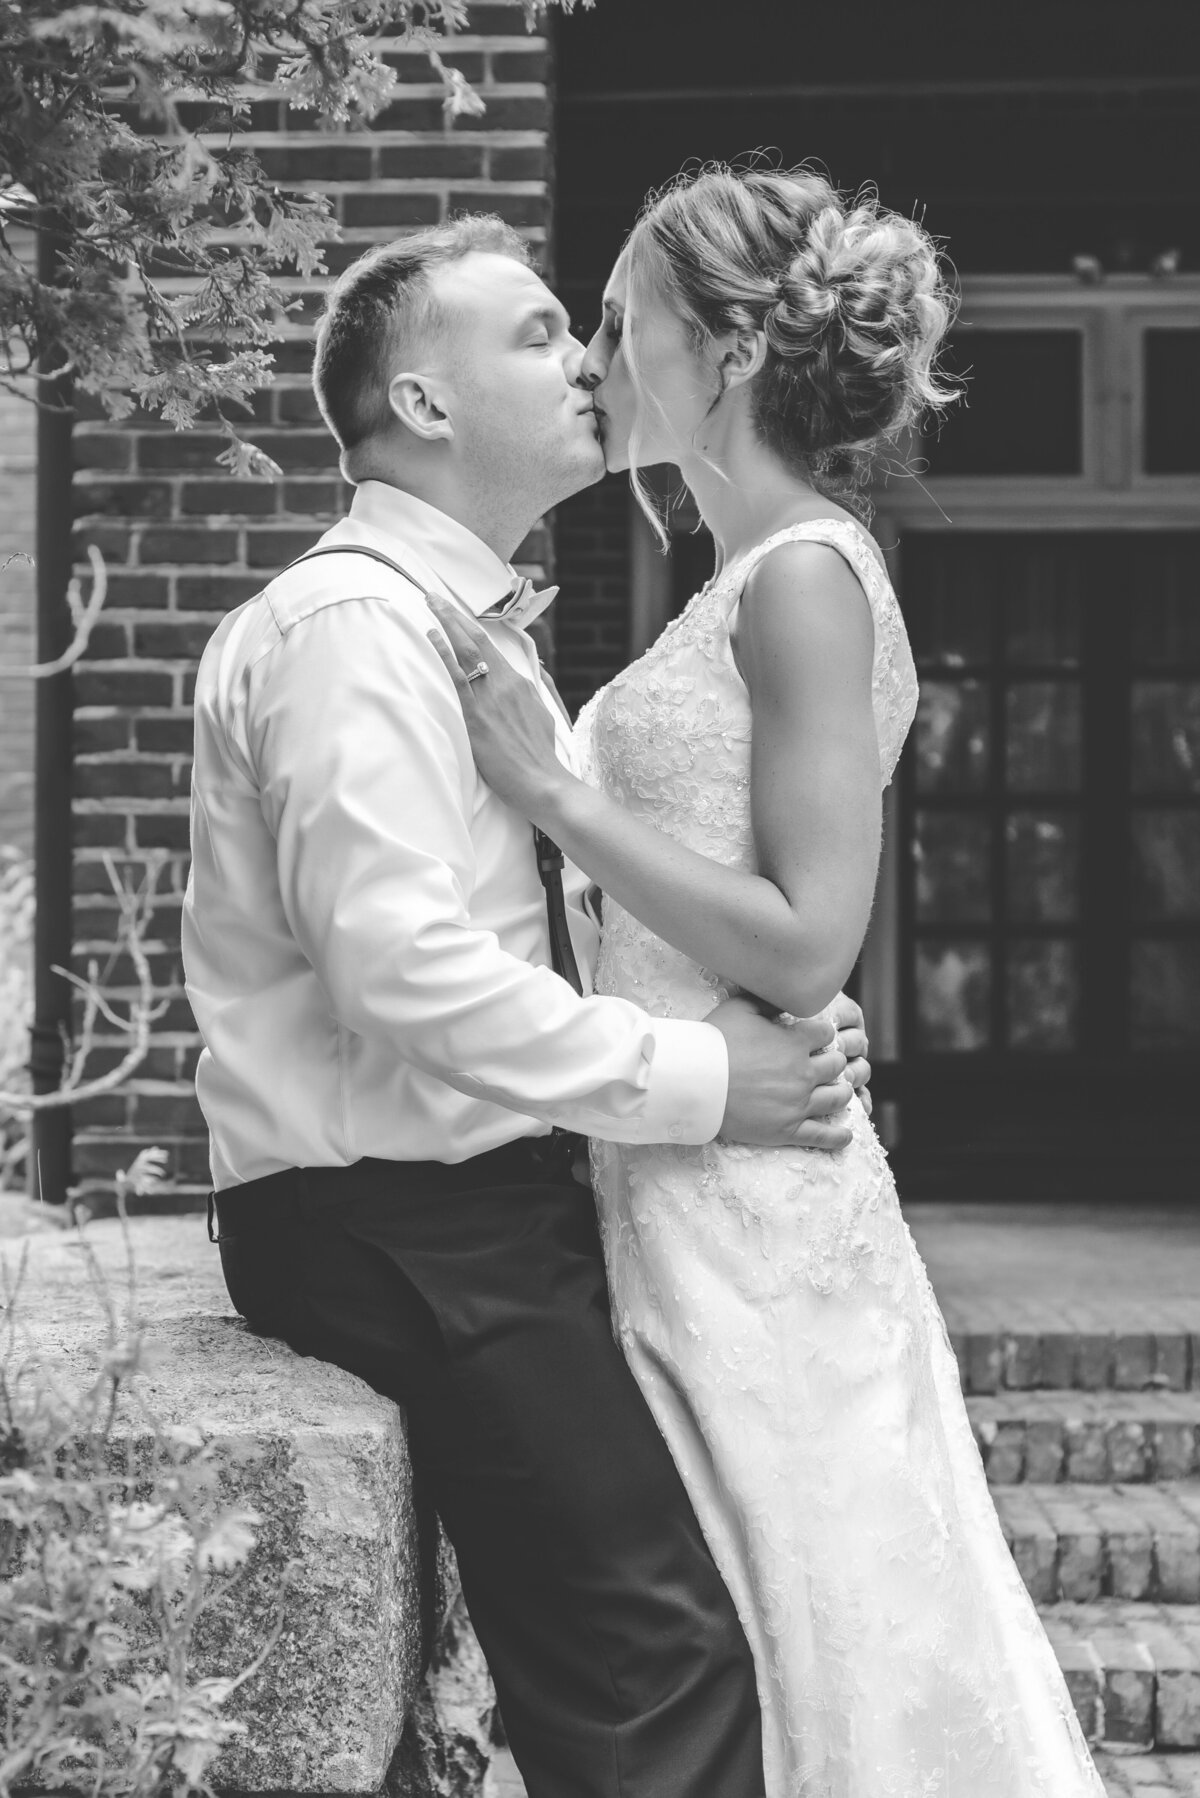 Black and white portrait bride and groom at wedding in Kennebunkport Maine